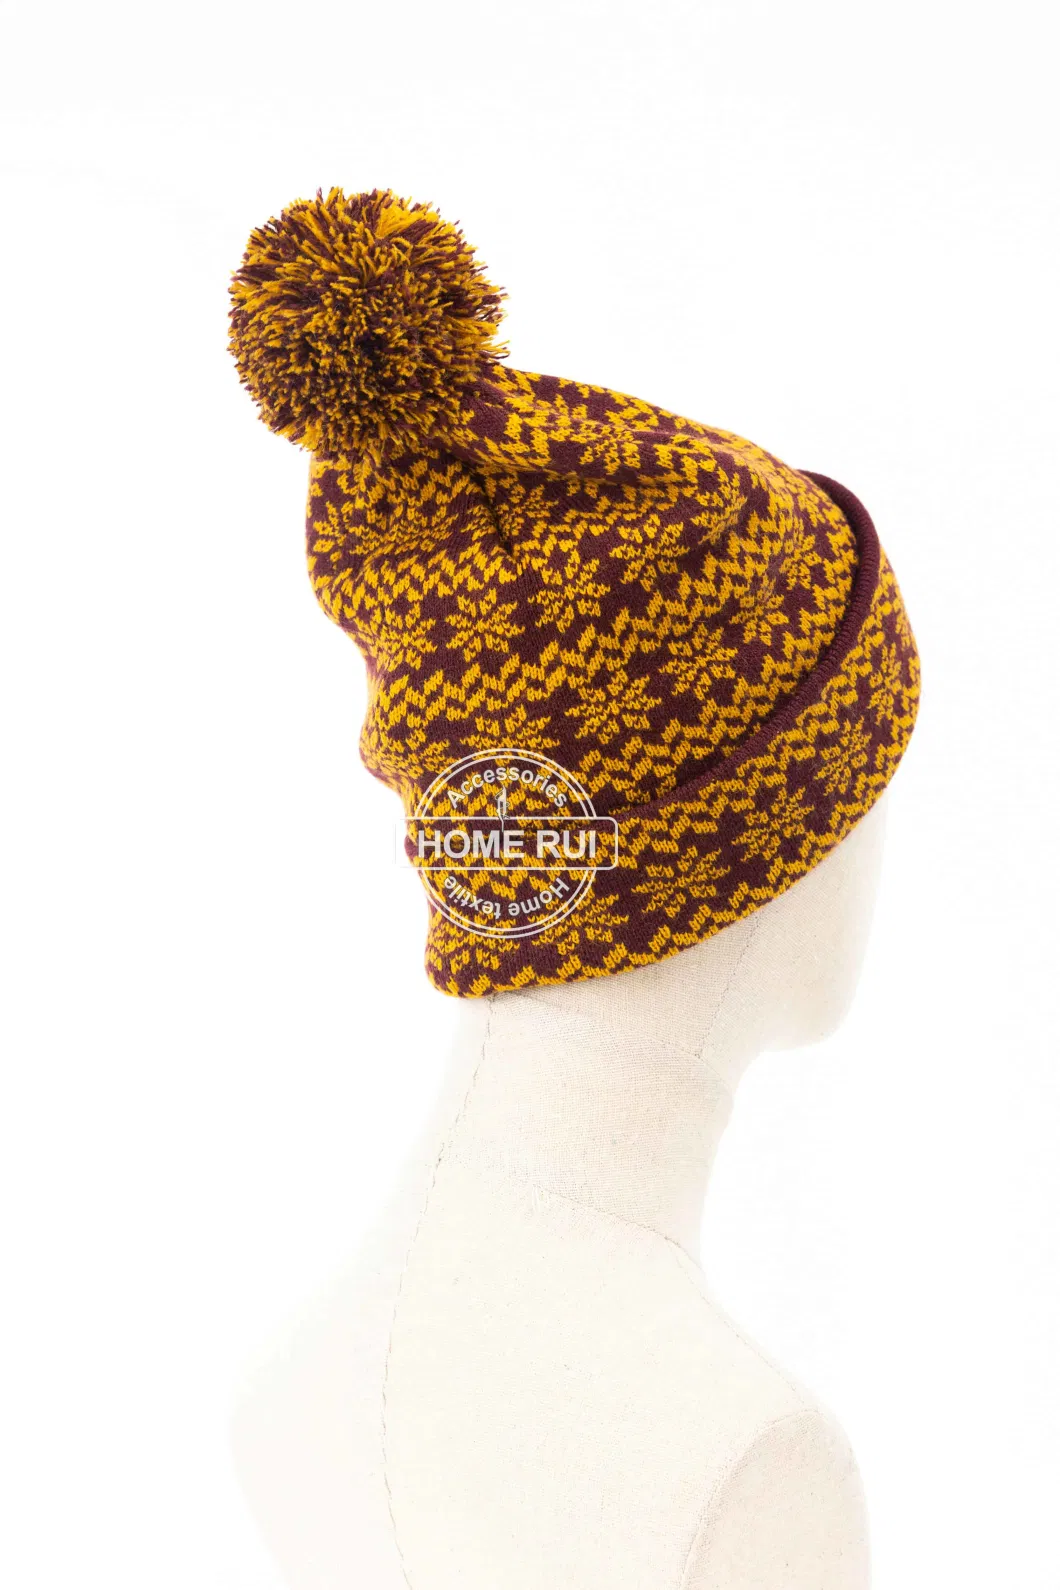 Outdoor Lady Girls POM Snowboard Casual Floppy Slouchy Snow Christmas Textured Mustard Cap Beanie